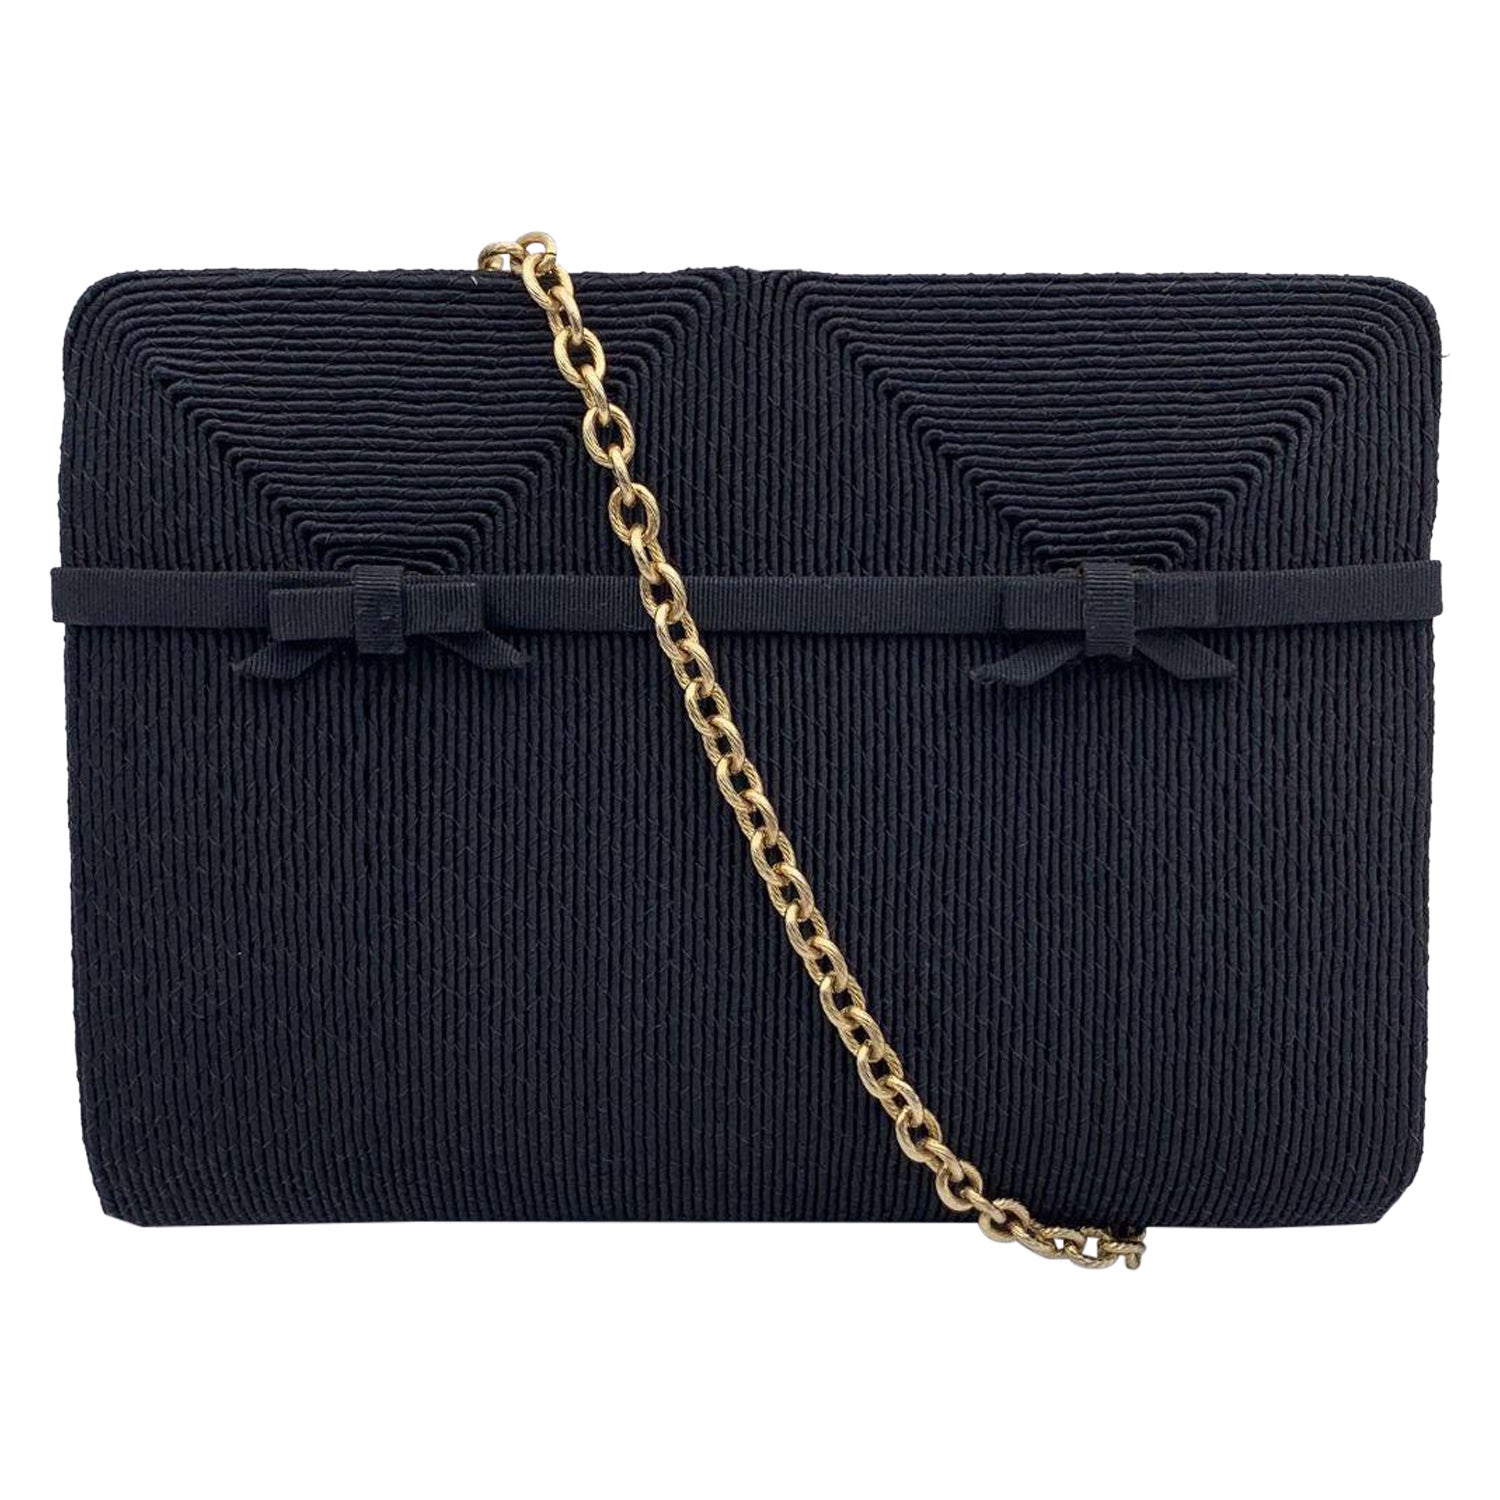 Gucci Vintage Black Fabric Bows Evening Bag with Chain Strap For Sale